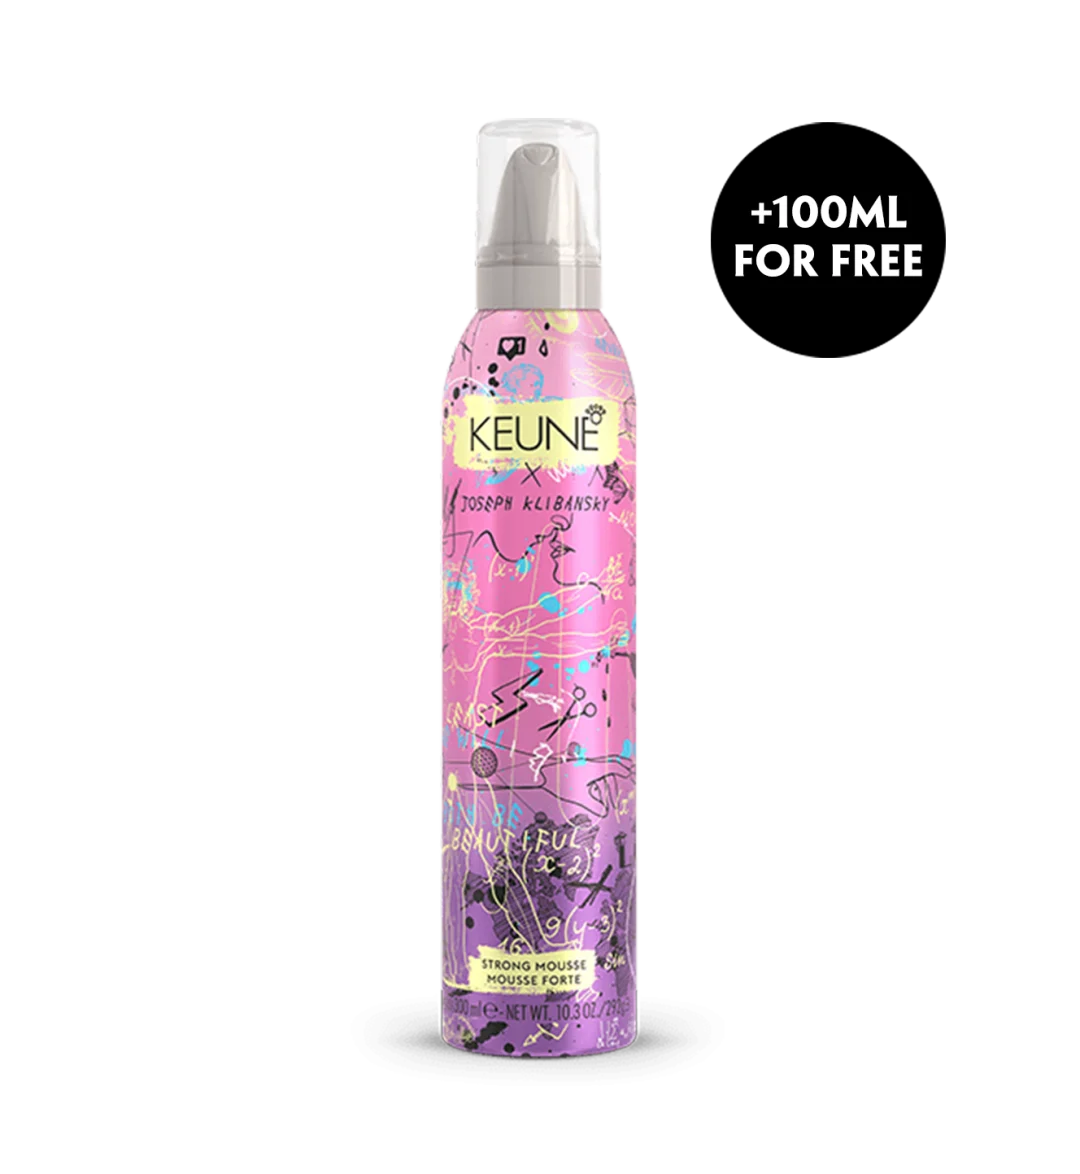 Keune LIMITED EDITION STRONG MOUSSE (300ml) - Hair Care